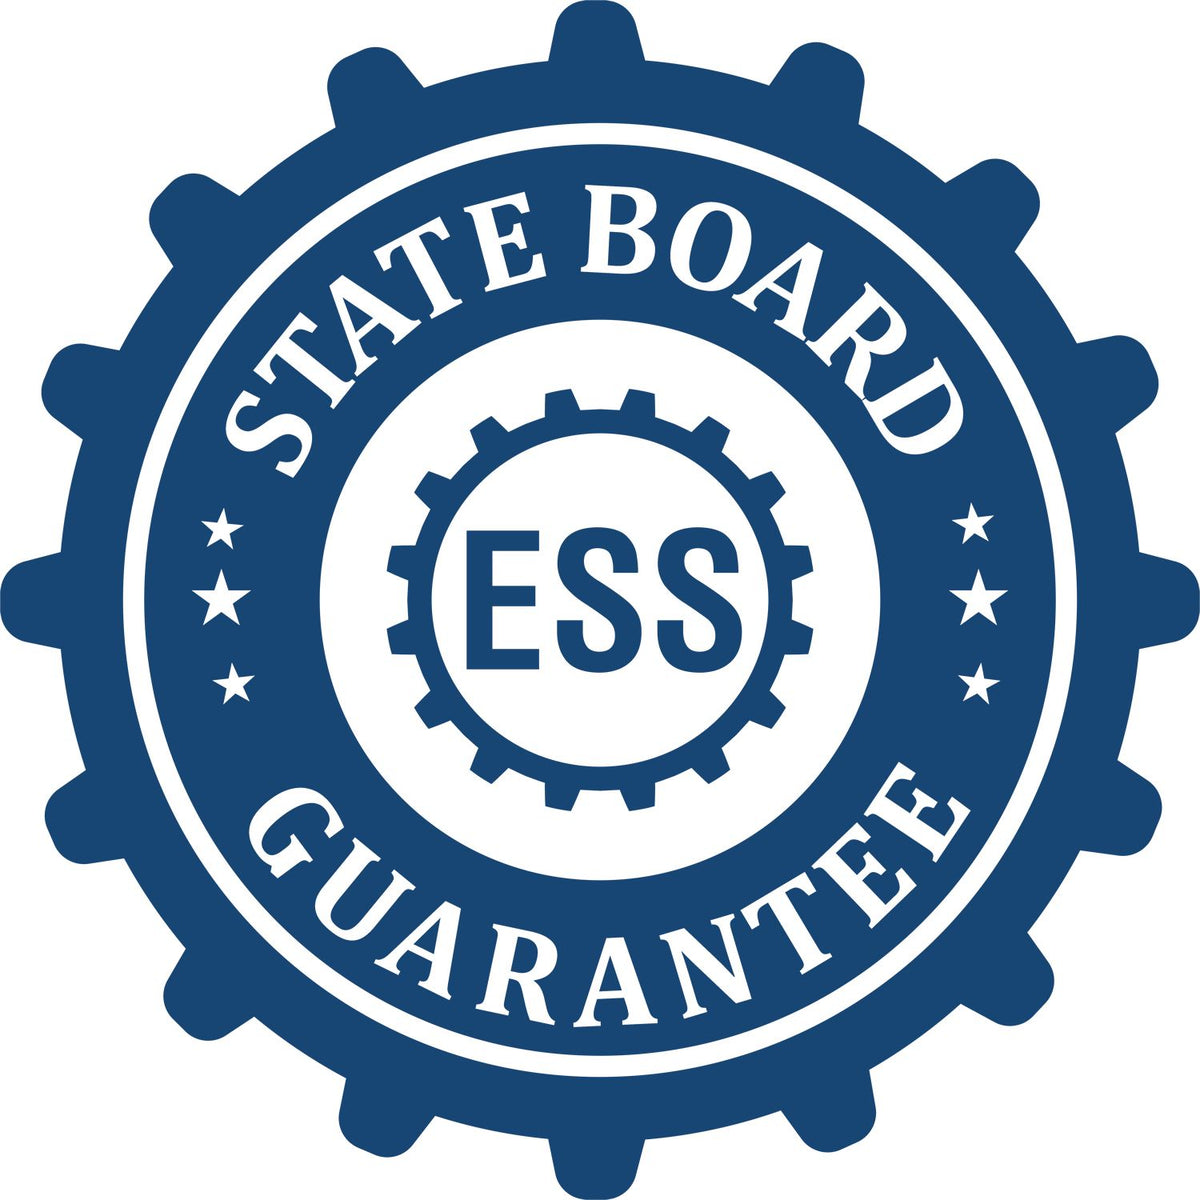 An emblem in a gear shape illustrating a state board guarantee for the Arkansas Desk Surveyor Seal Embosser product.